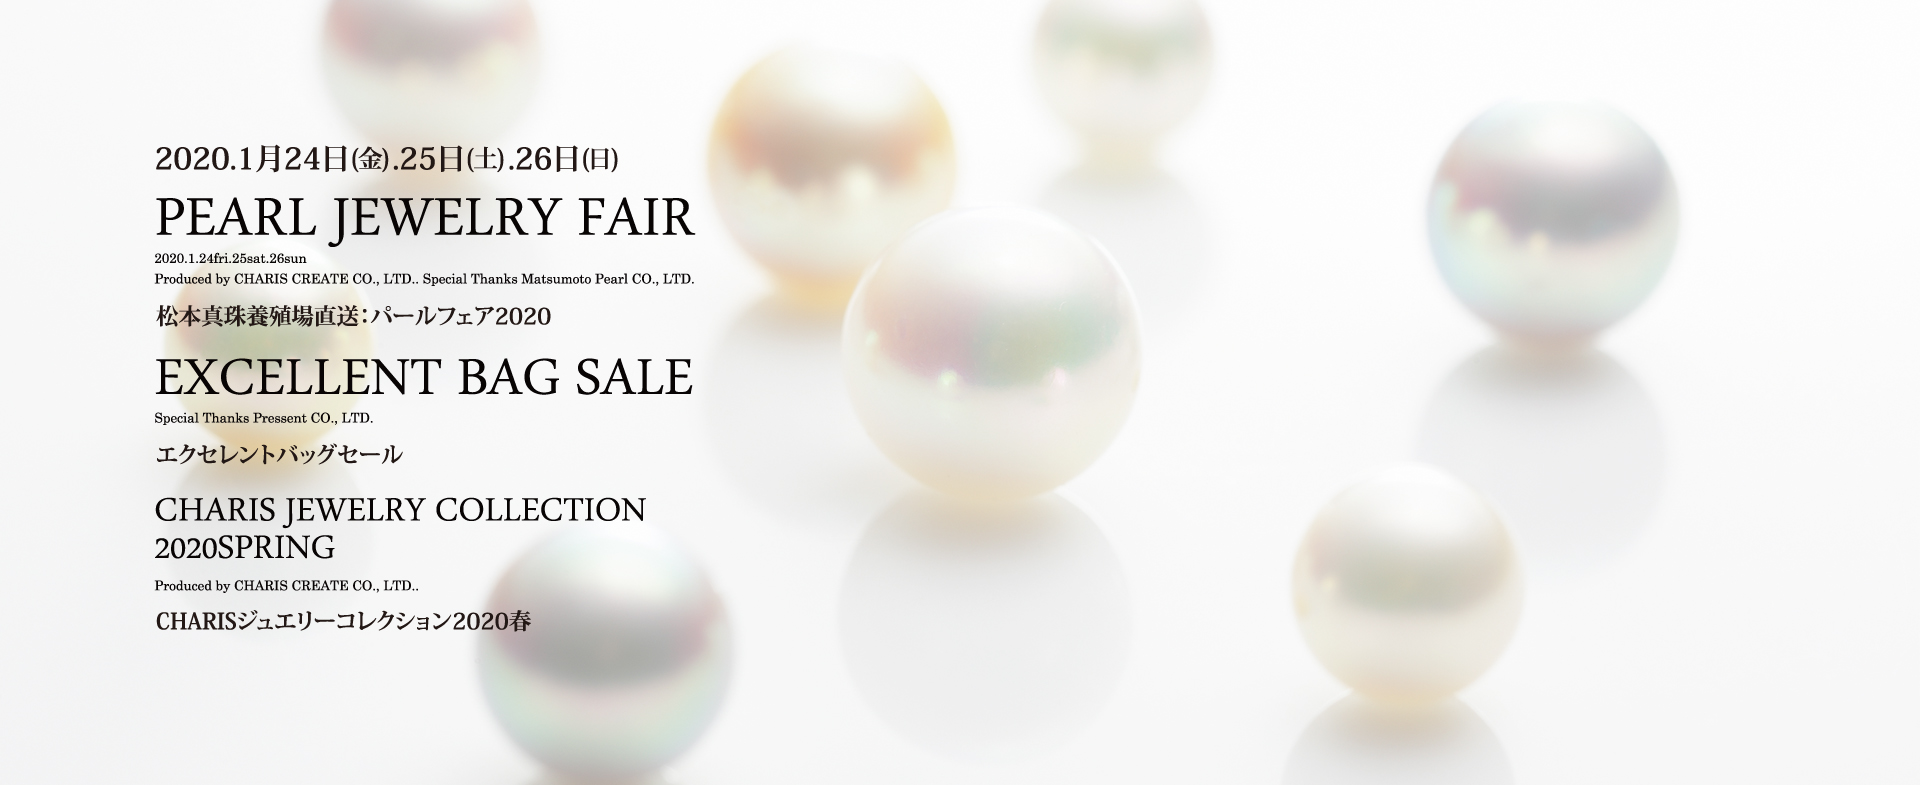 Pearl Jewelry Fair & Excellent Bag Sale